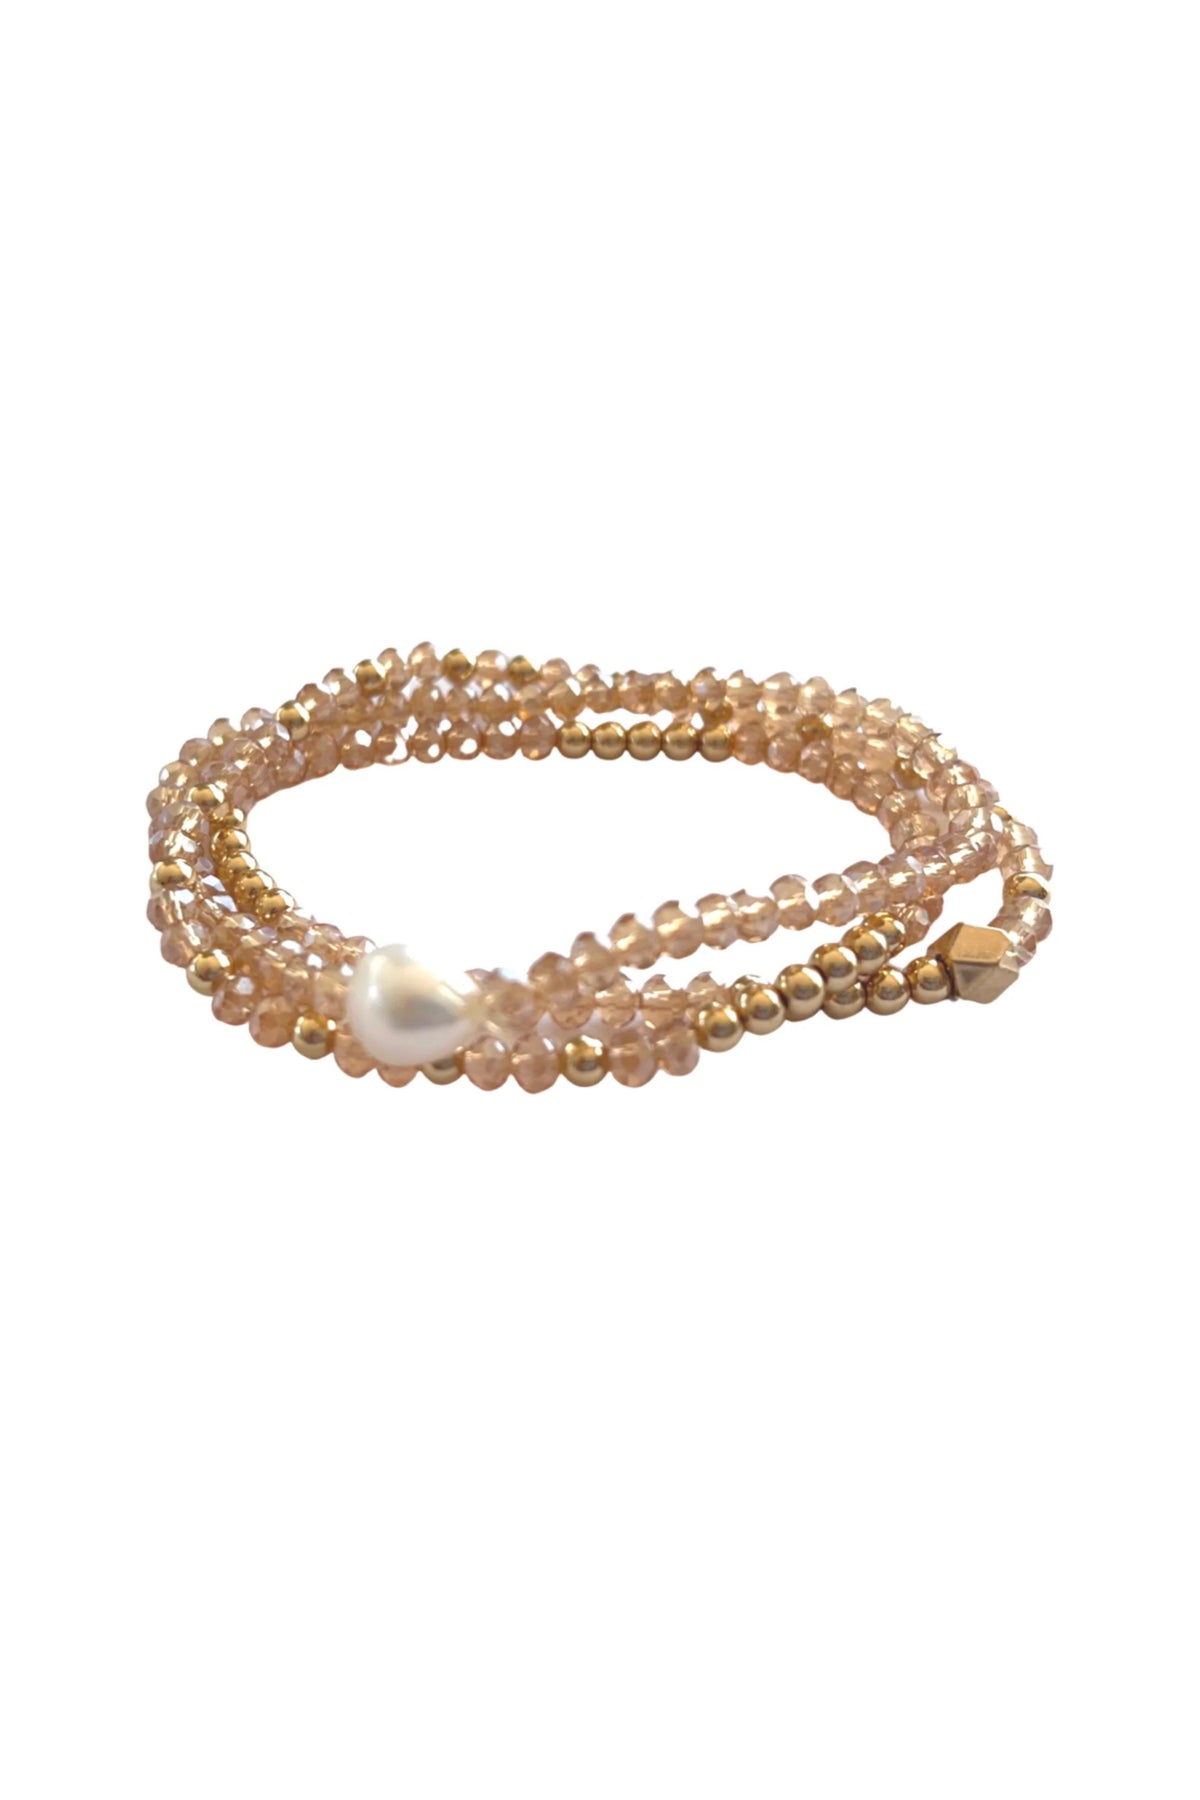 Champagne Pearl And Gold Beaded Bracelet Set